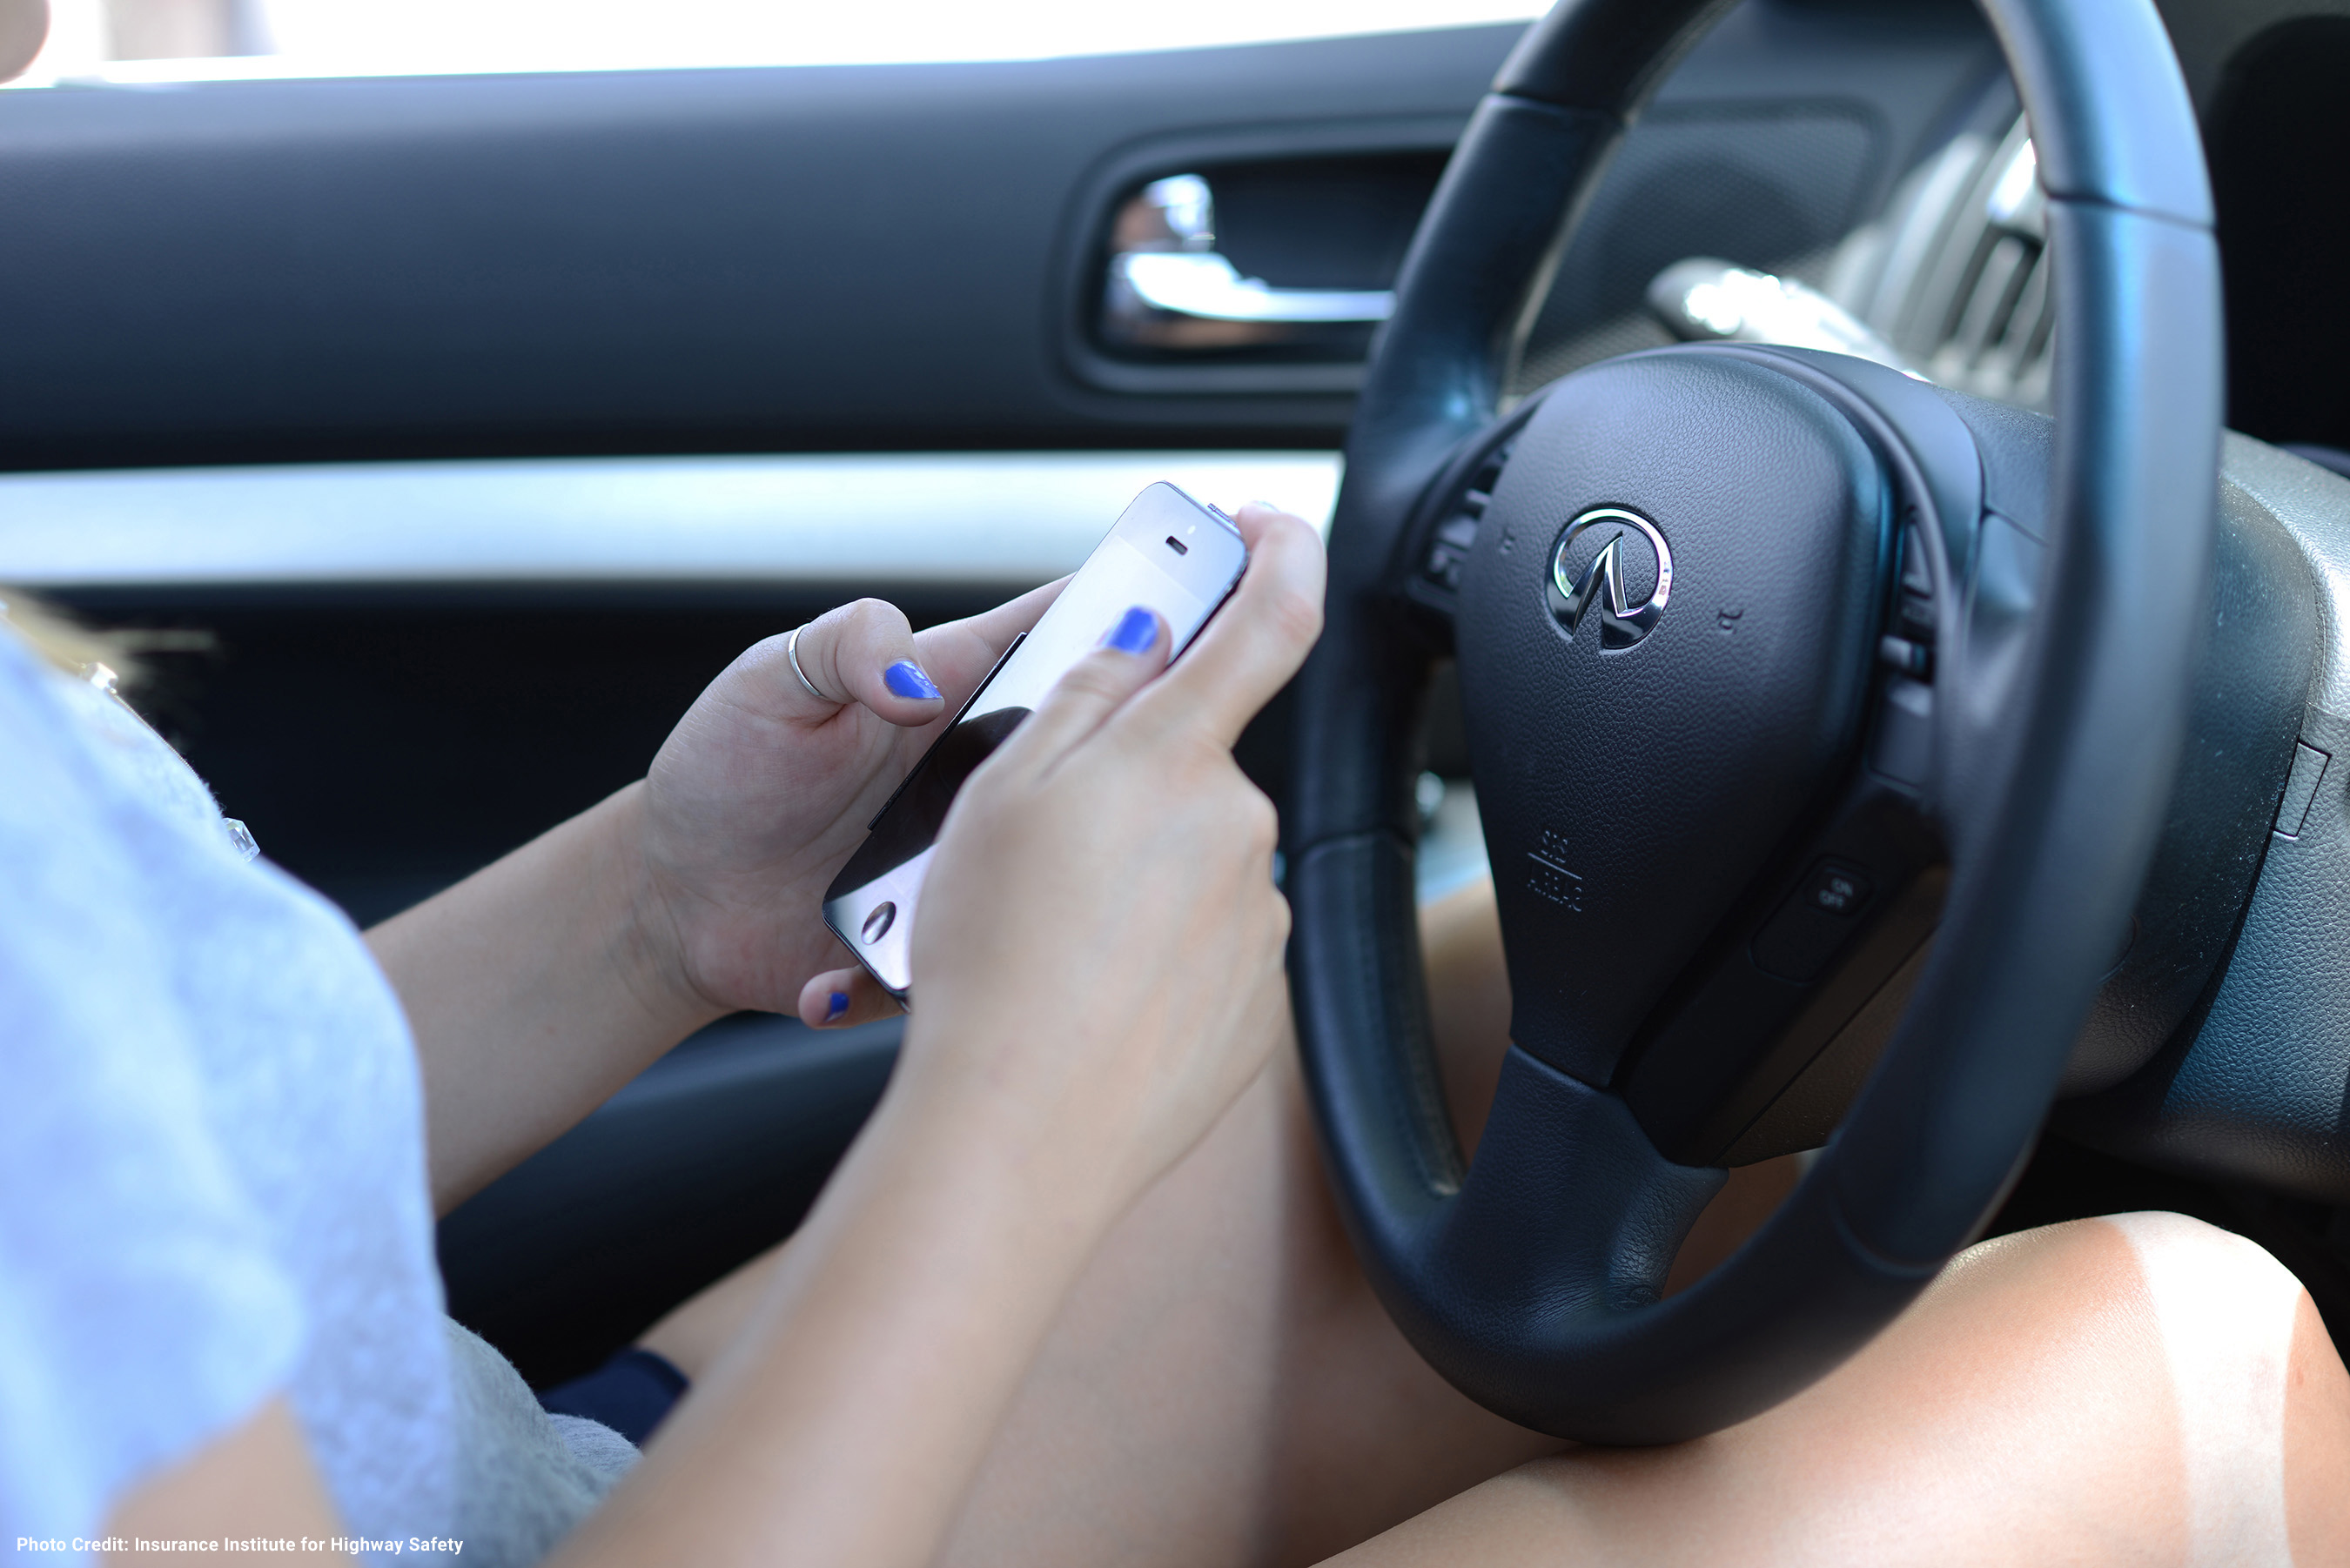 A new survey from State Farm reveals that almost all teen drivers know that texting behind the wheel is distracting, but 44% do it anyway.